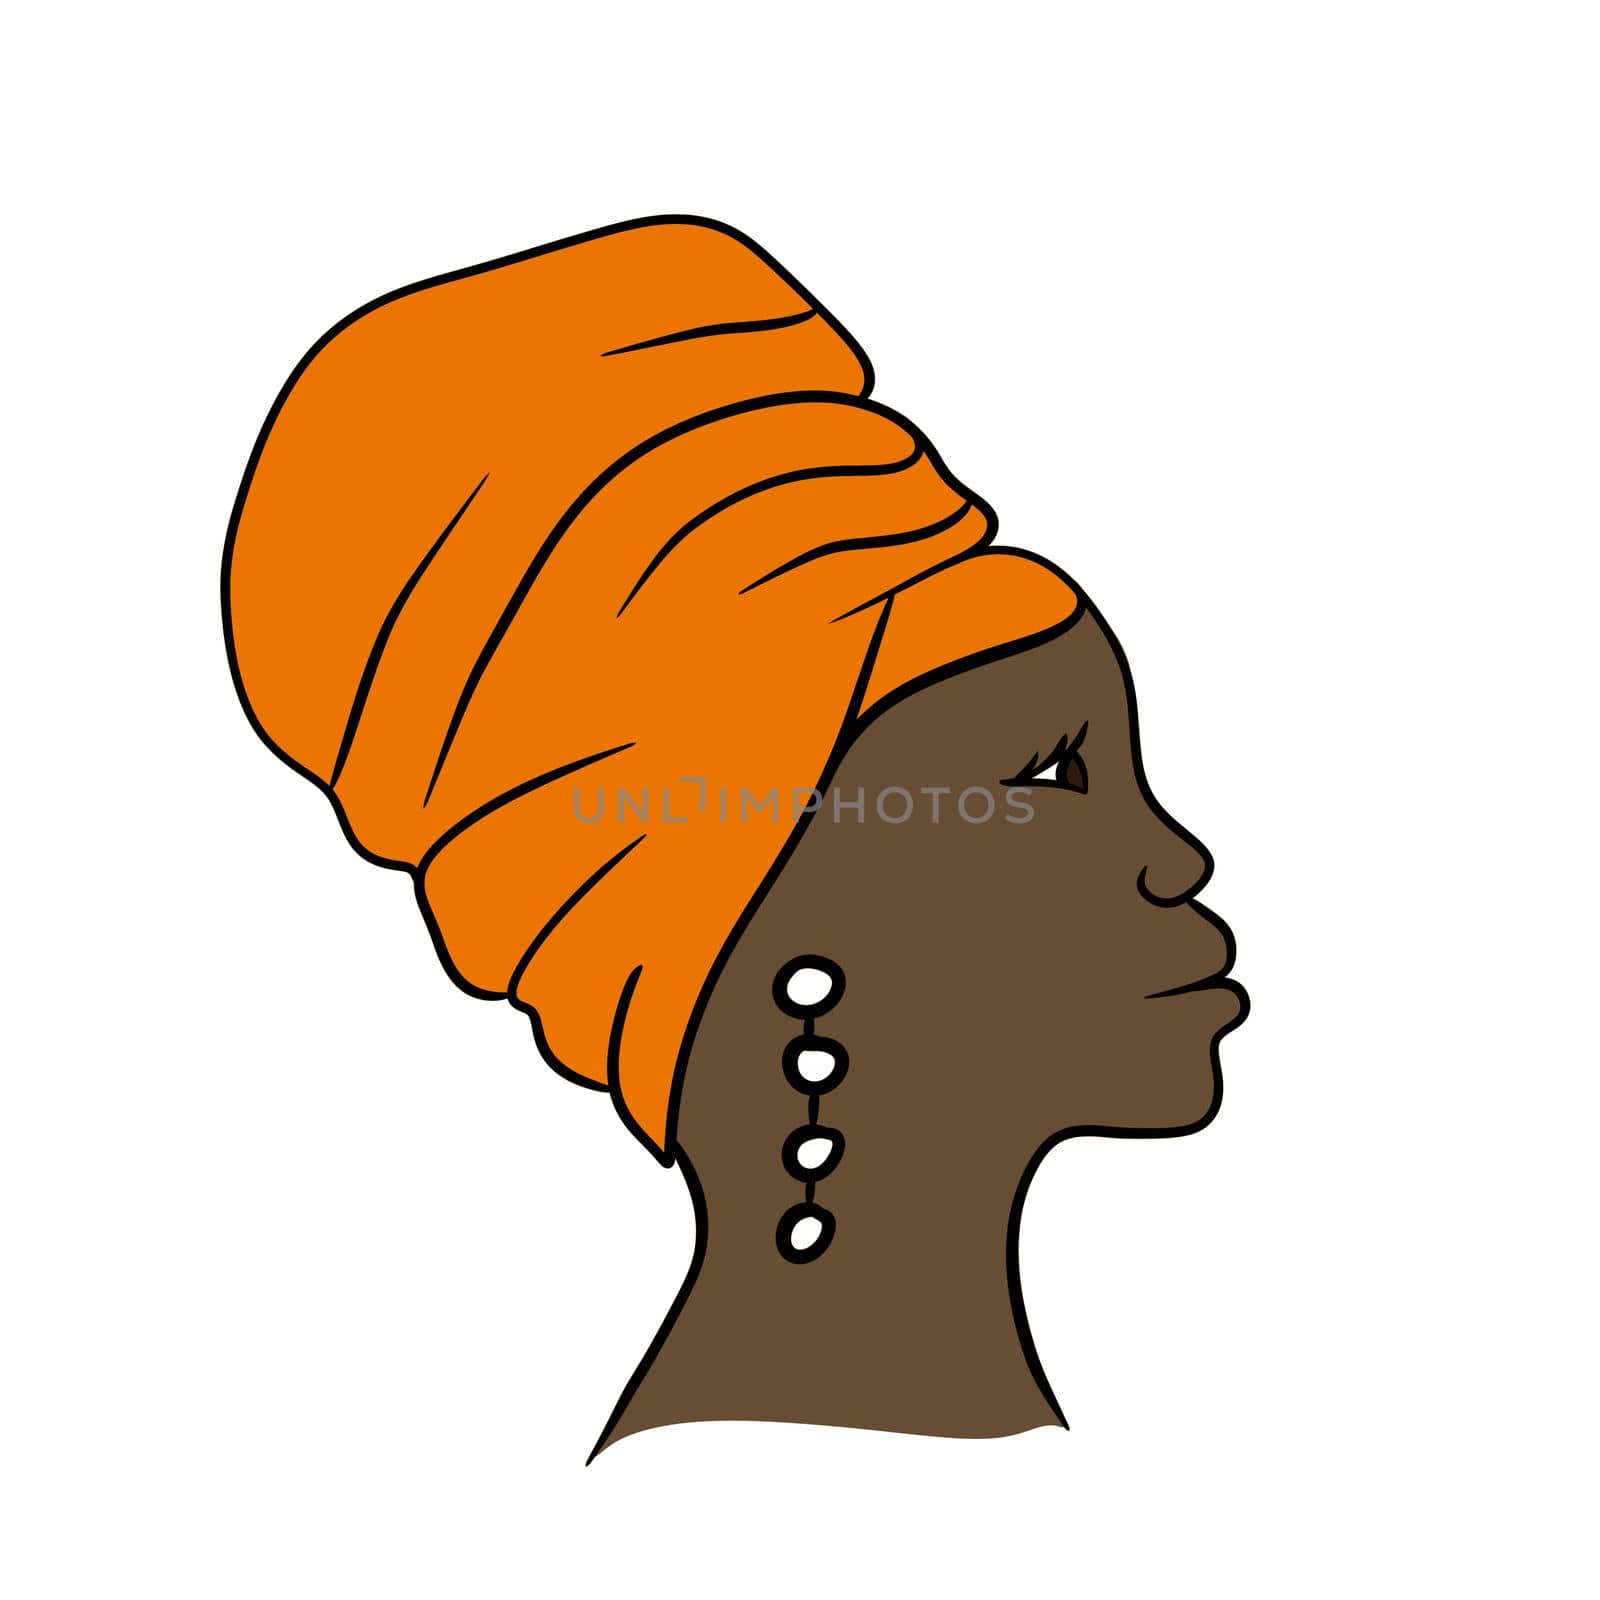 Hand drawn illustration of black african american woman with orange ethnic traditional head wrap wrapping headwear scarf. Black lives matter fashion design, modern elegant print for beauty products, minimalist style. by Lagmar